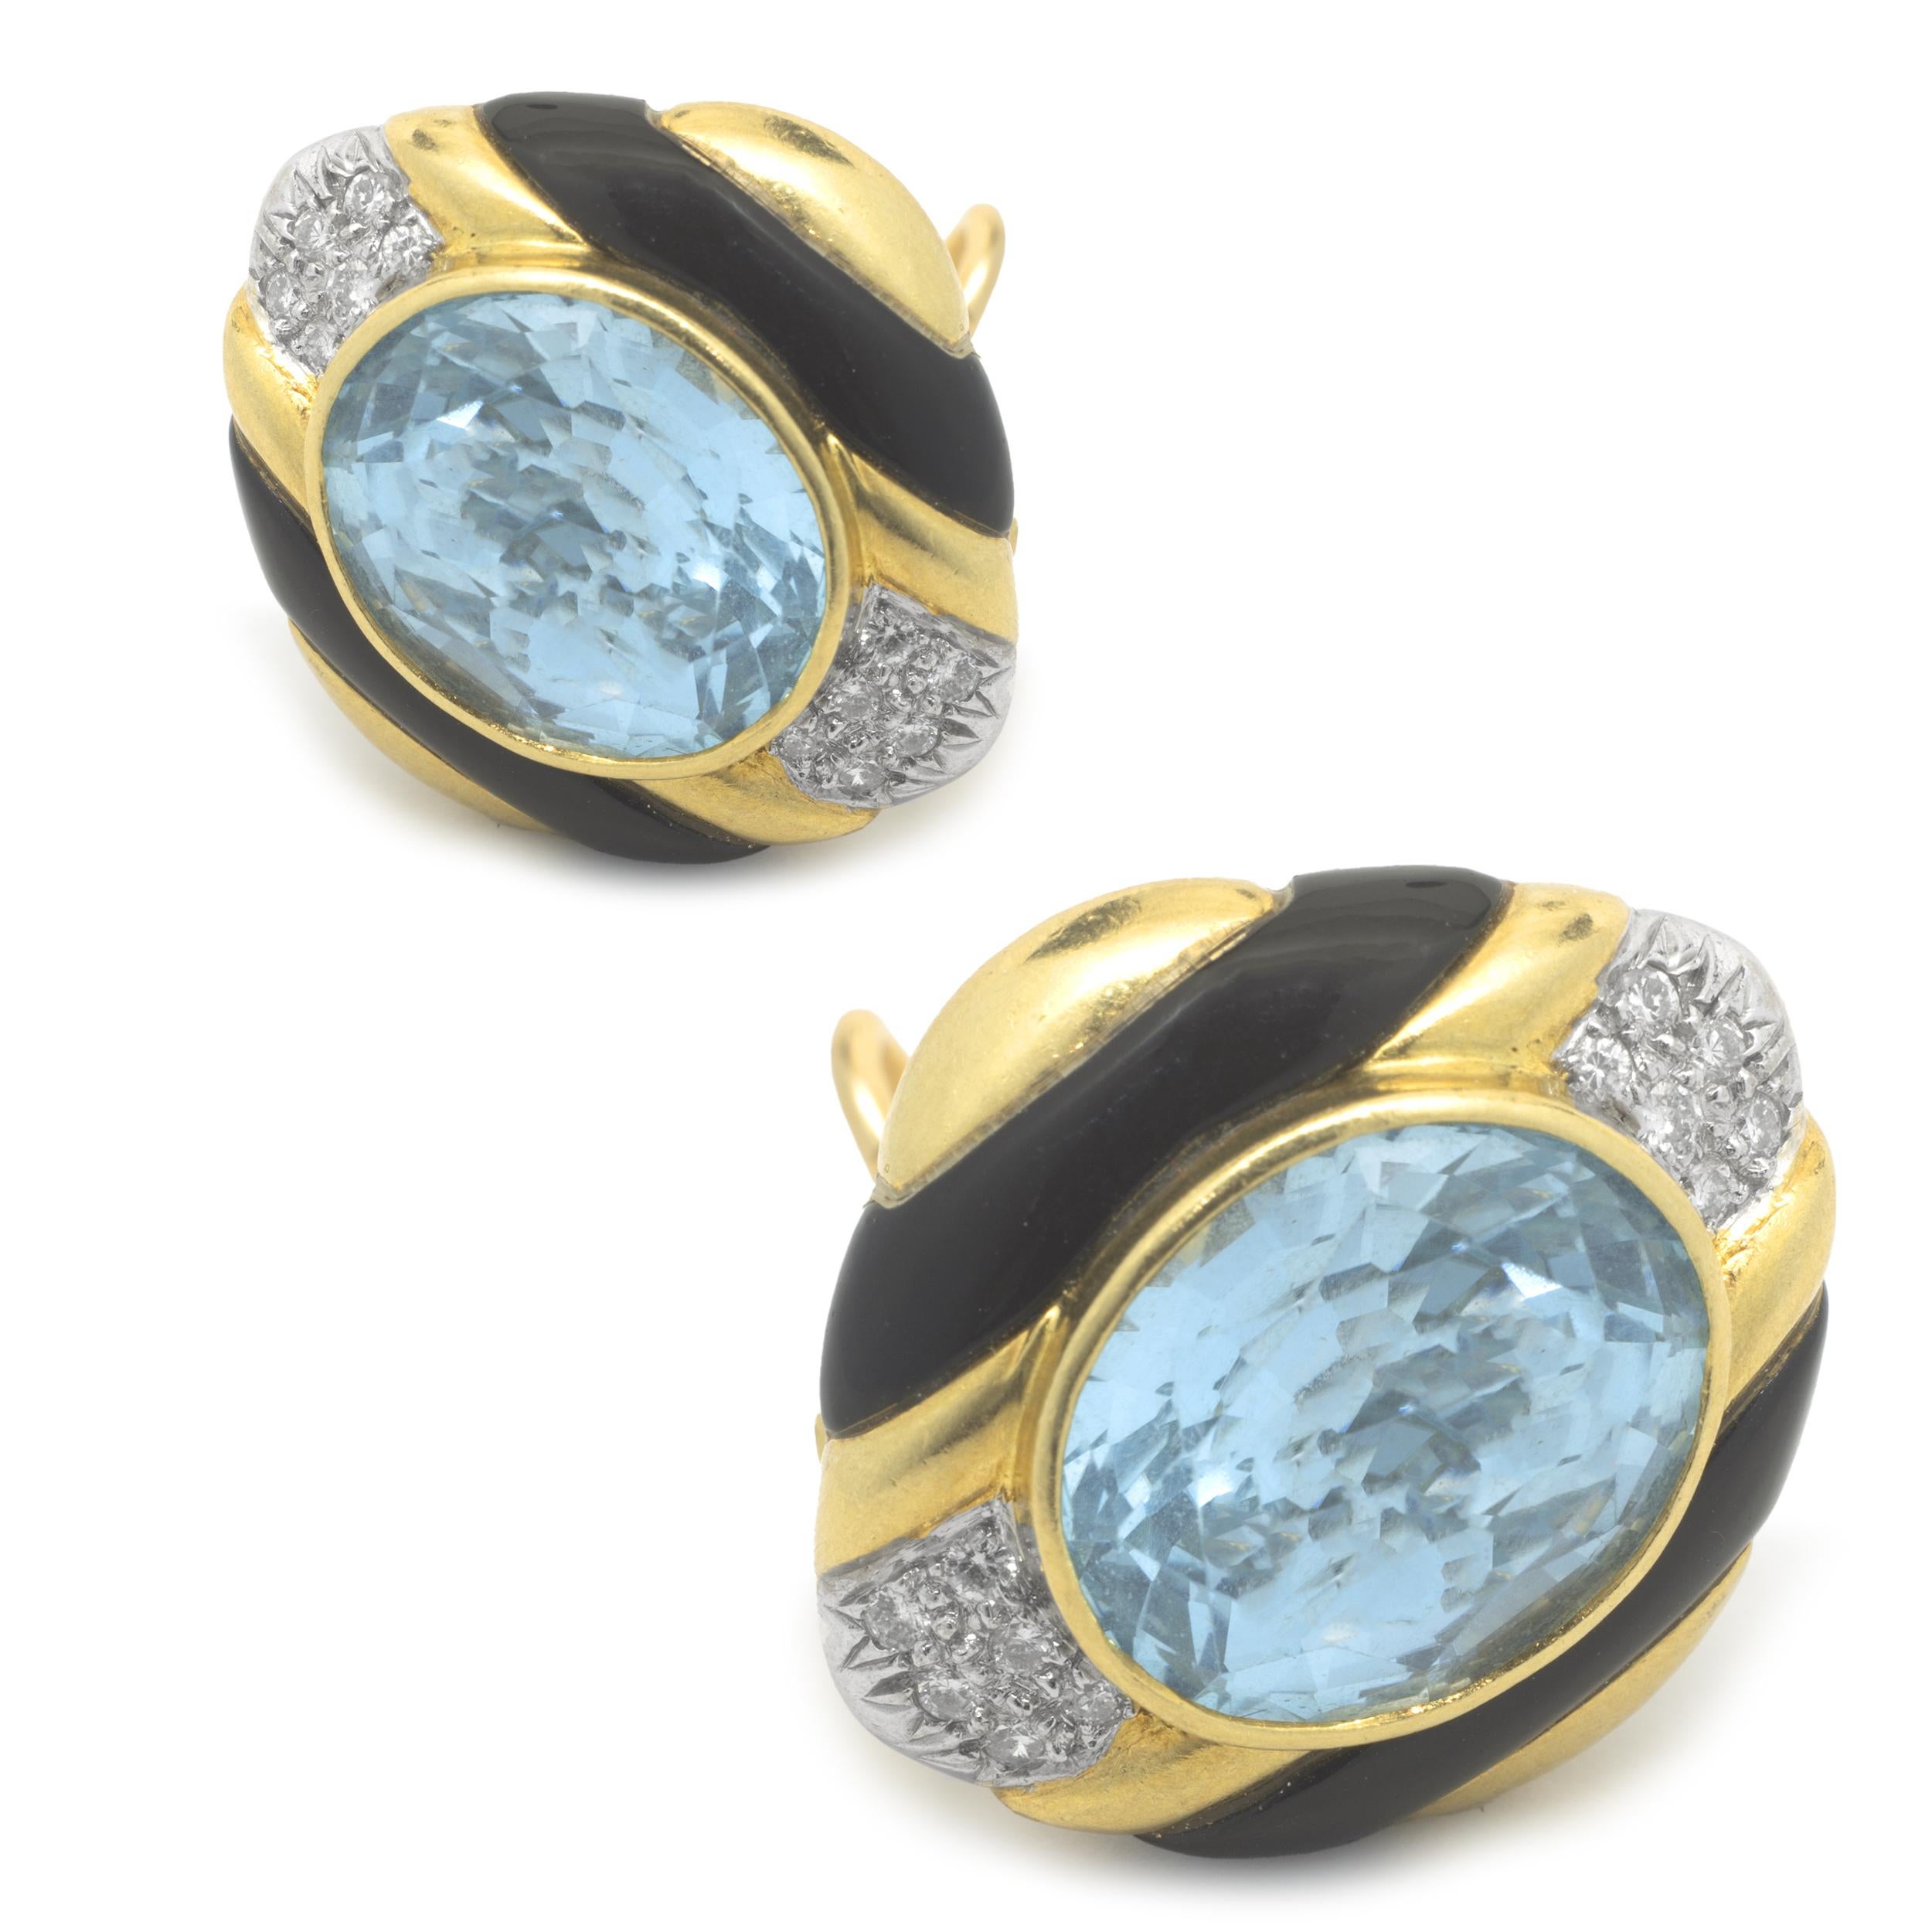 Designer: custom
Material: 18K yellow gold
Diamond: 24 round cut = .24cttw
Color: H
Clarity: SI1
Blue Topaz: 2 oval cut = 19.50cttw
Dimensions: earrings measure 24.5 X 22mm
Weight: 20.85 grams
